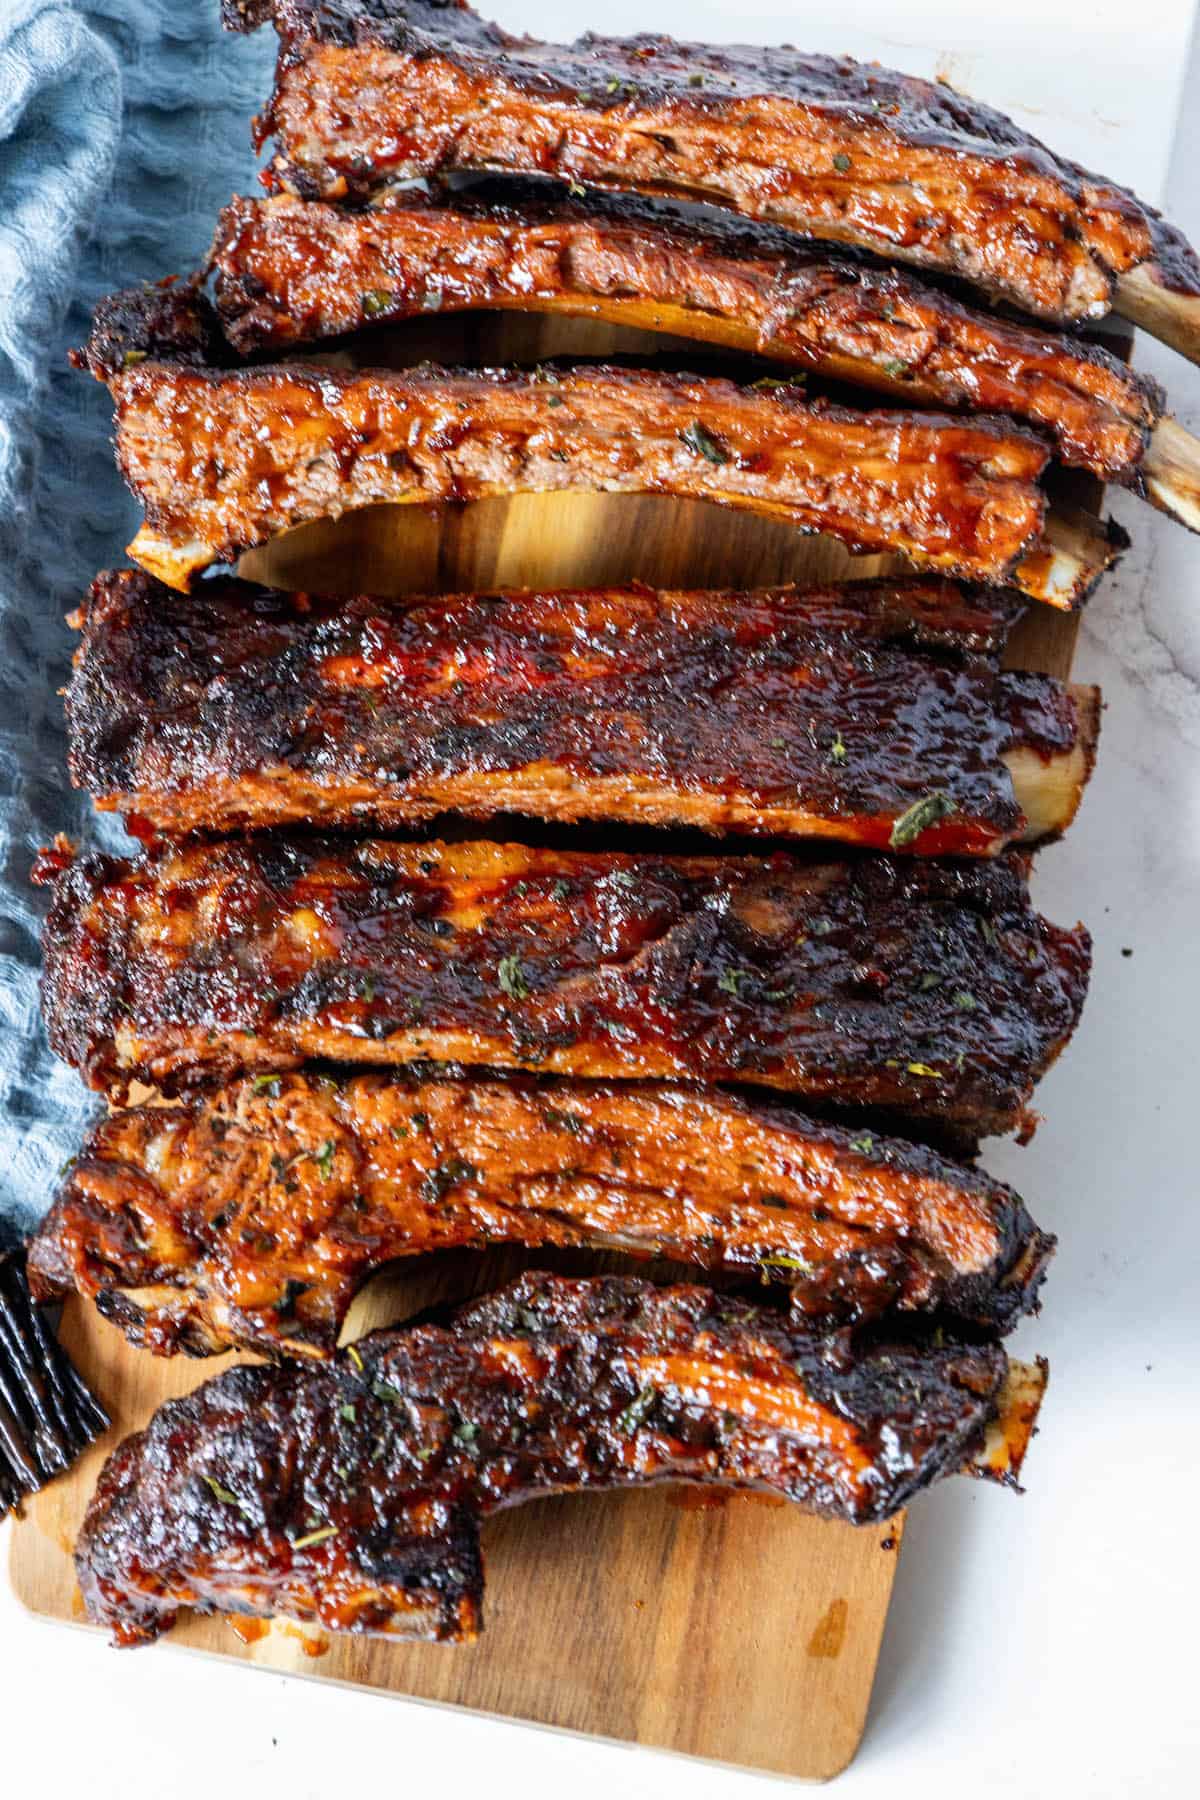 Oven-baked beef ribs on a wooden cutting board.